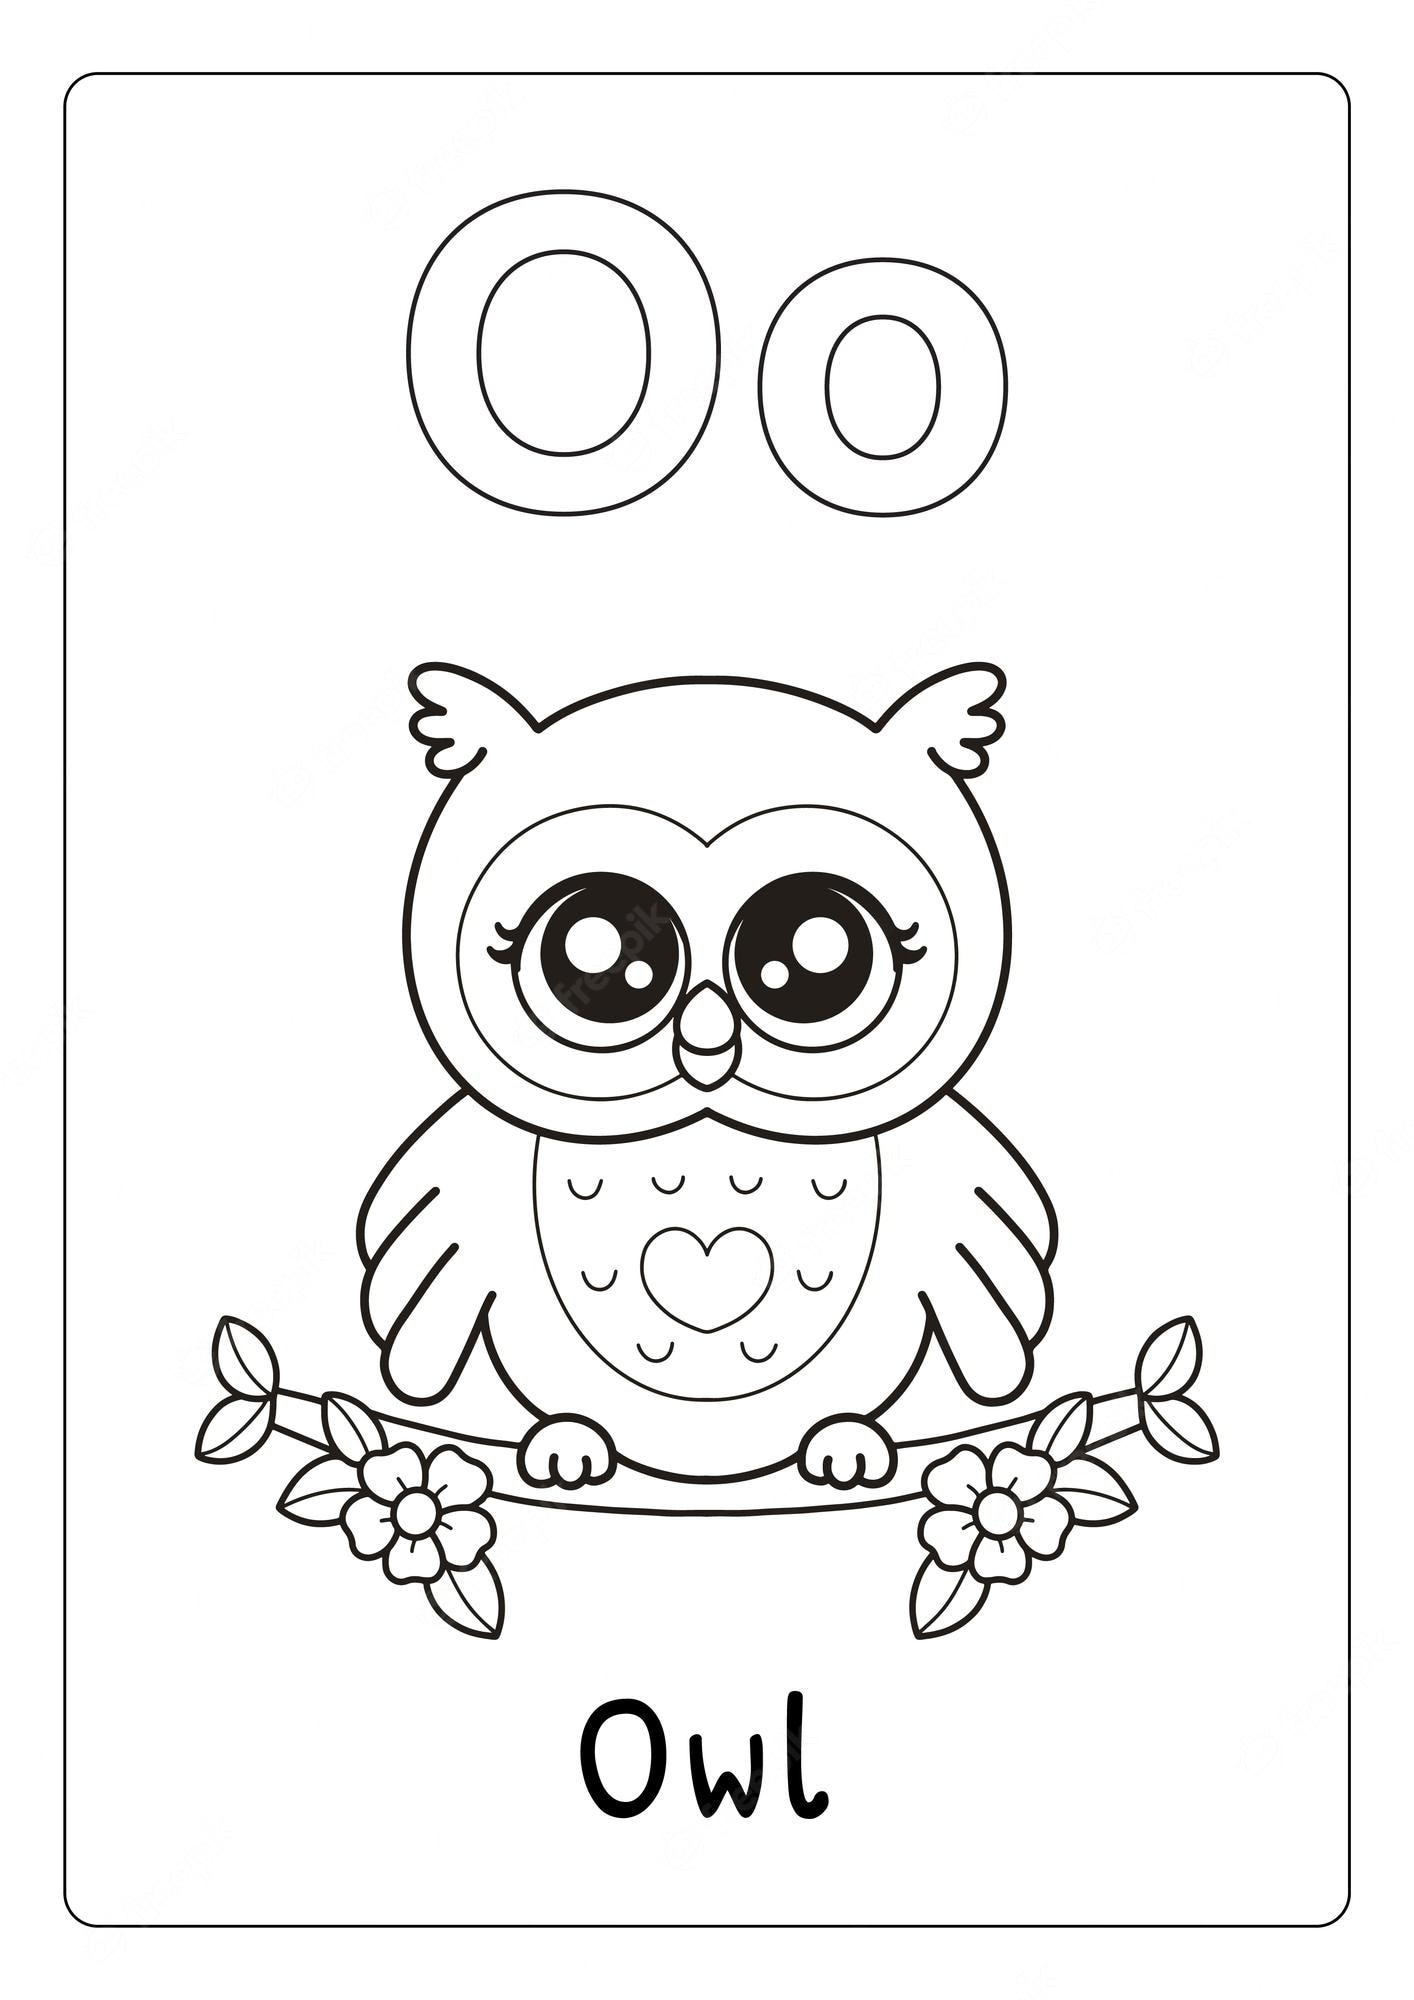 Premium Vector | Alphabet letter o for owl coloring page for kids